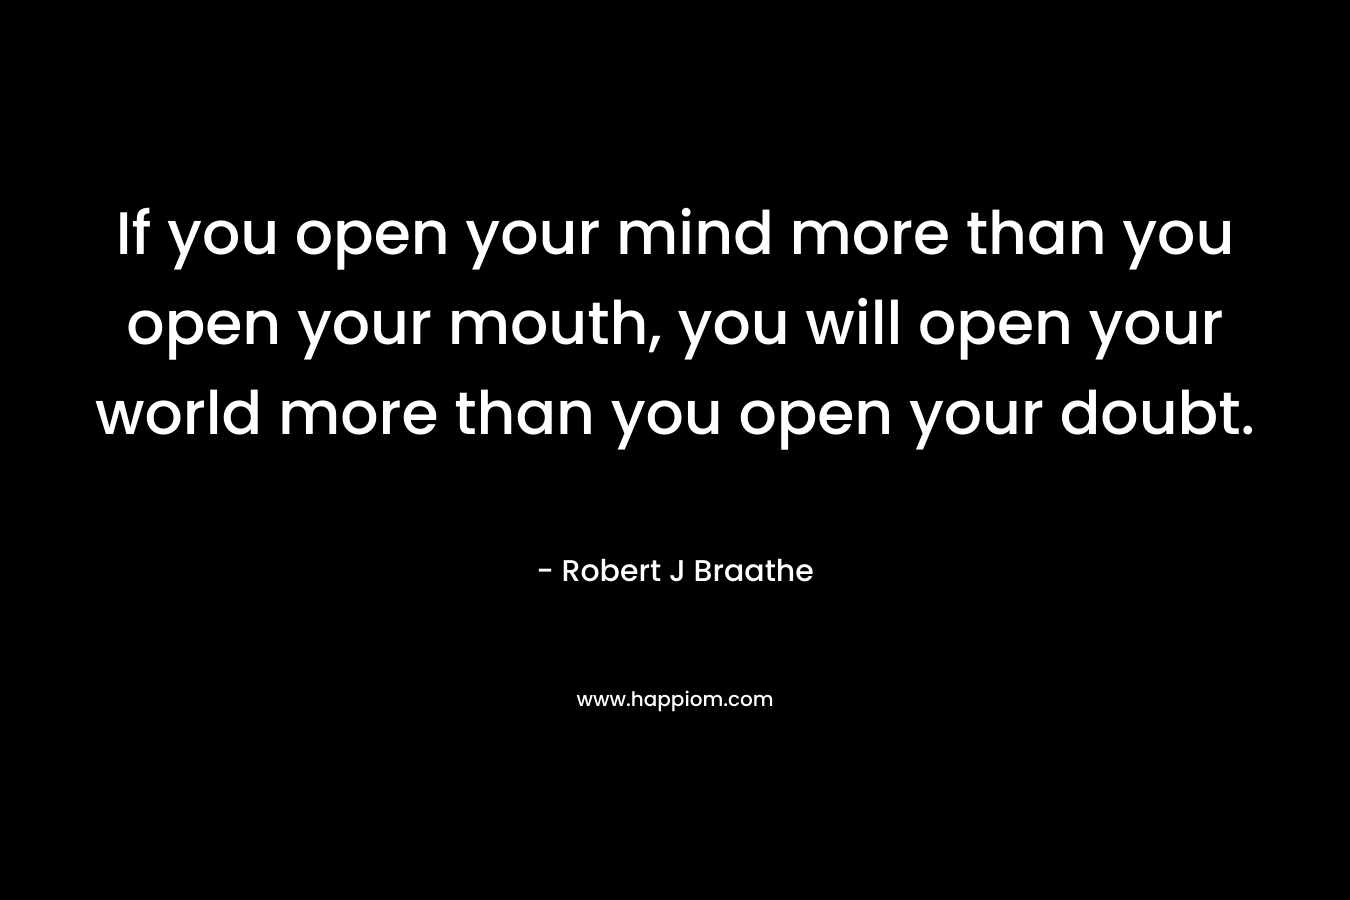 If you open your mind more than you open your mouth, you will open your world more than you open your doubt.